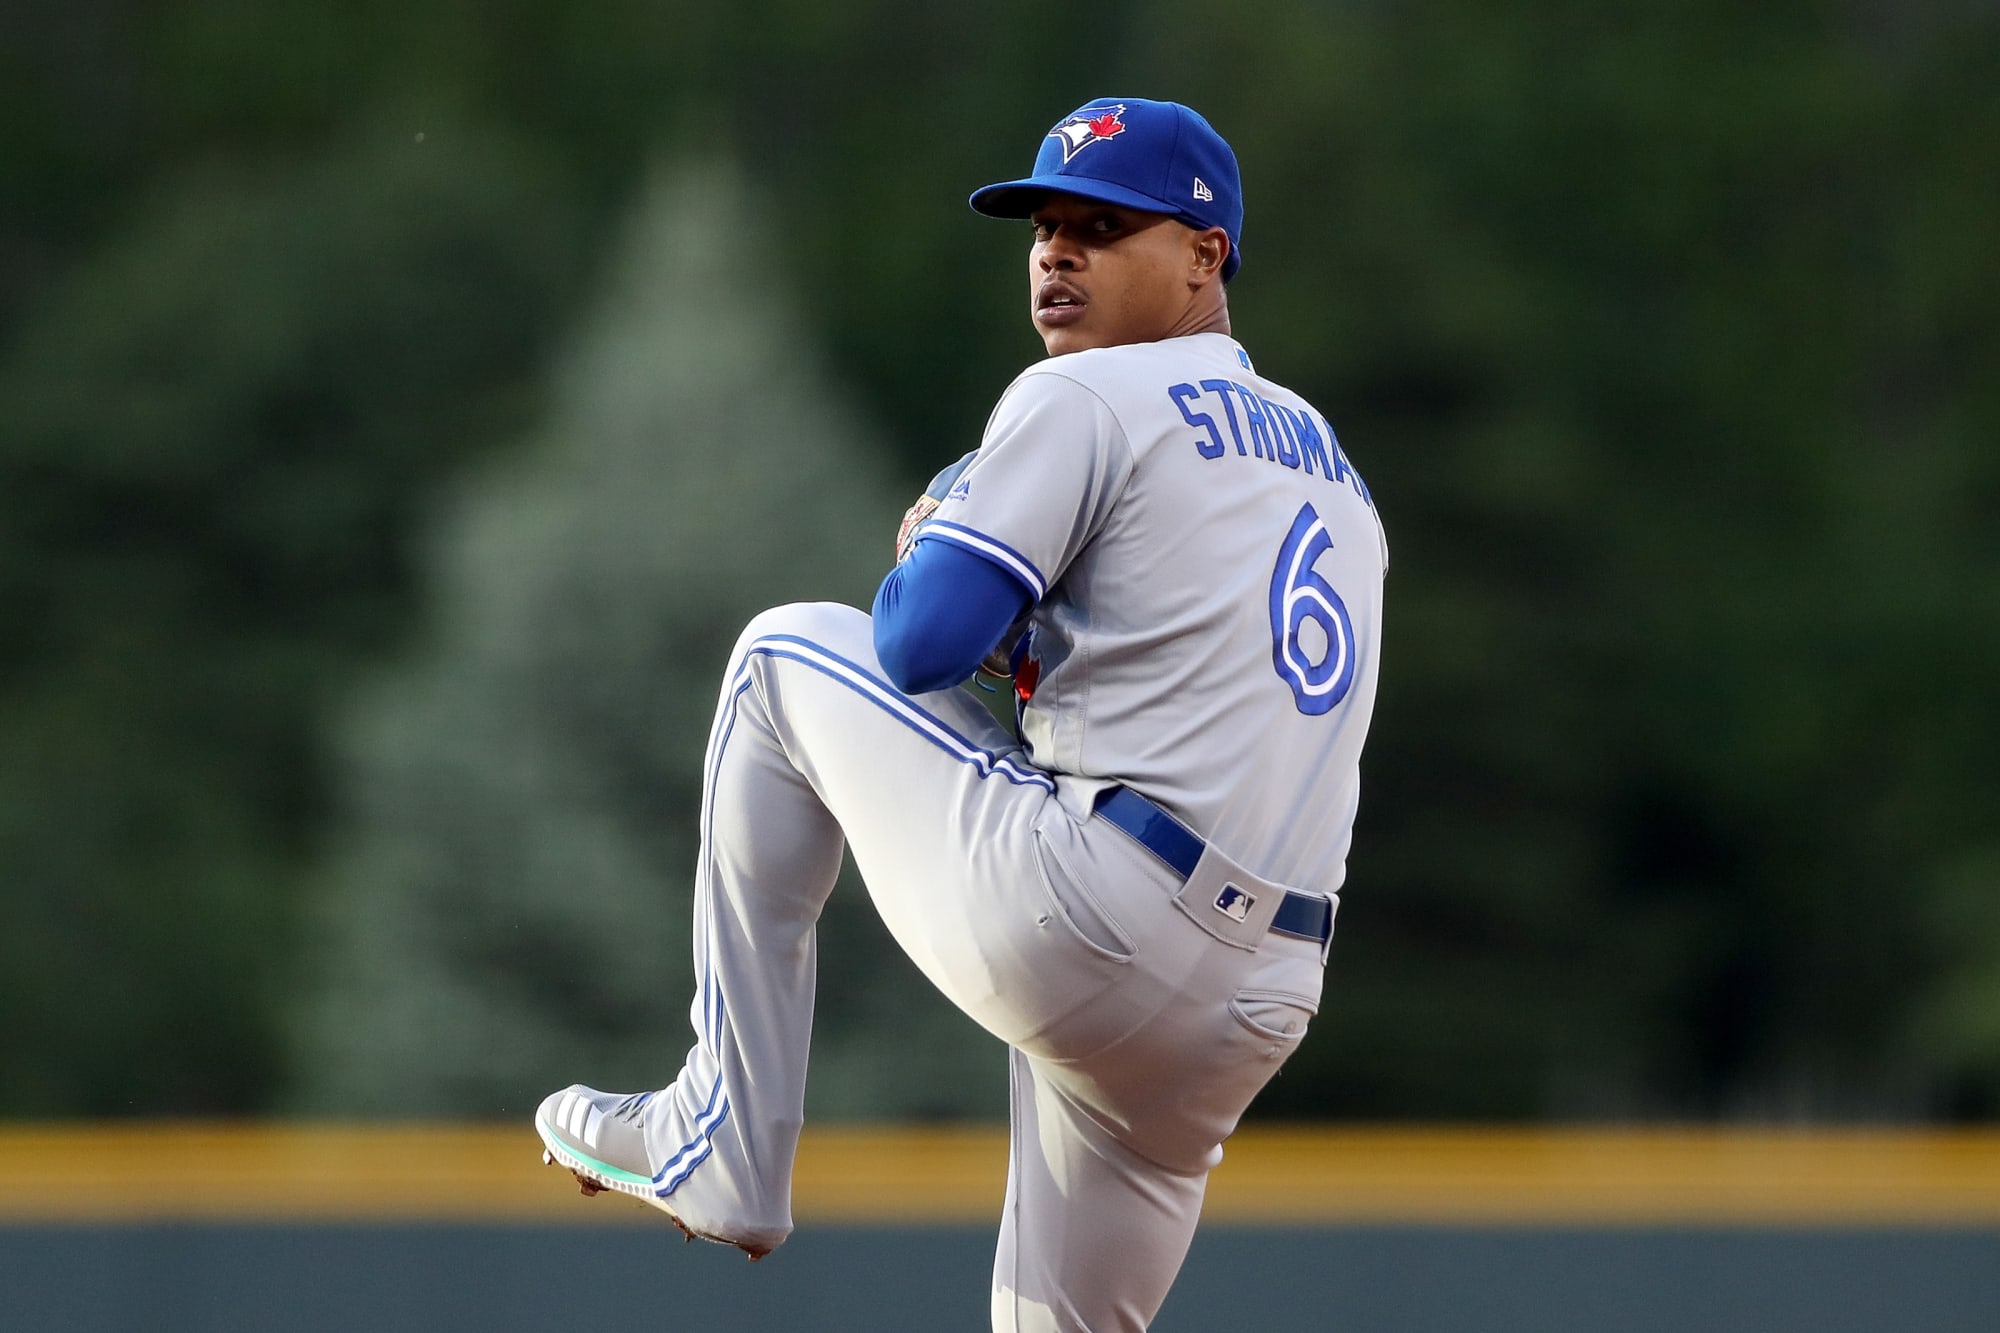 Marcus Stroman's thoughts after pitching a 1-hit complete game on